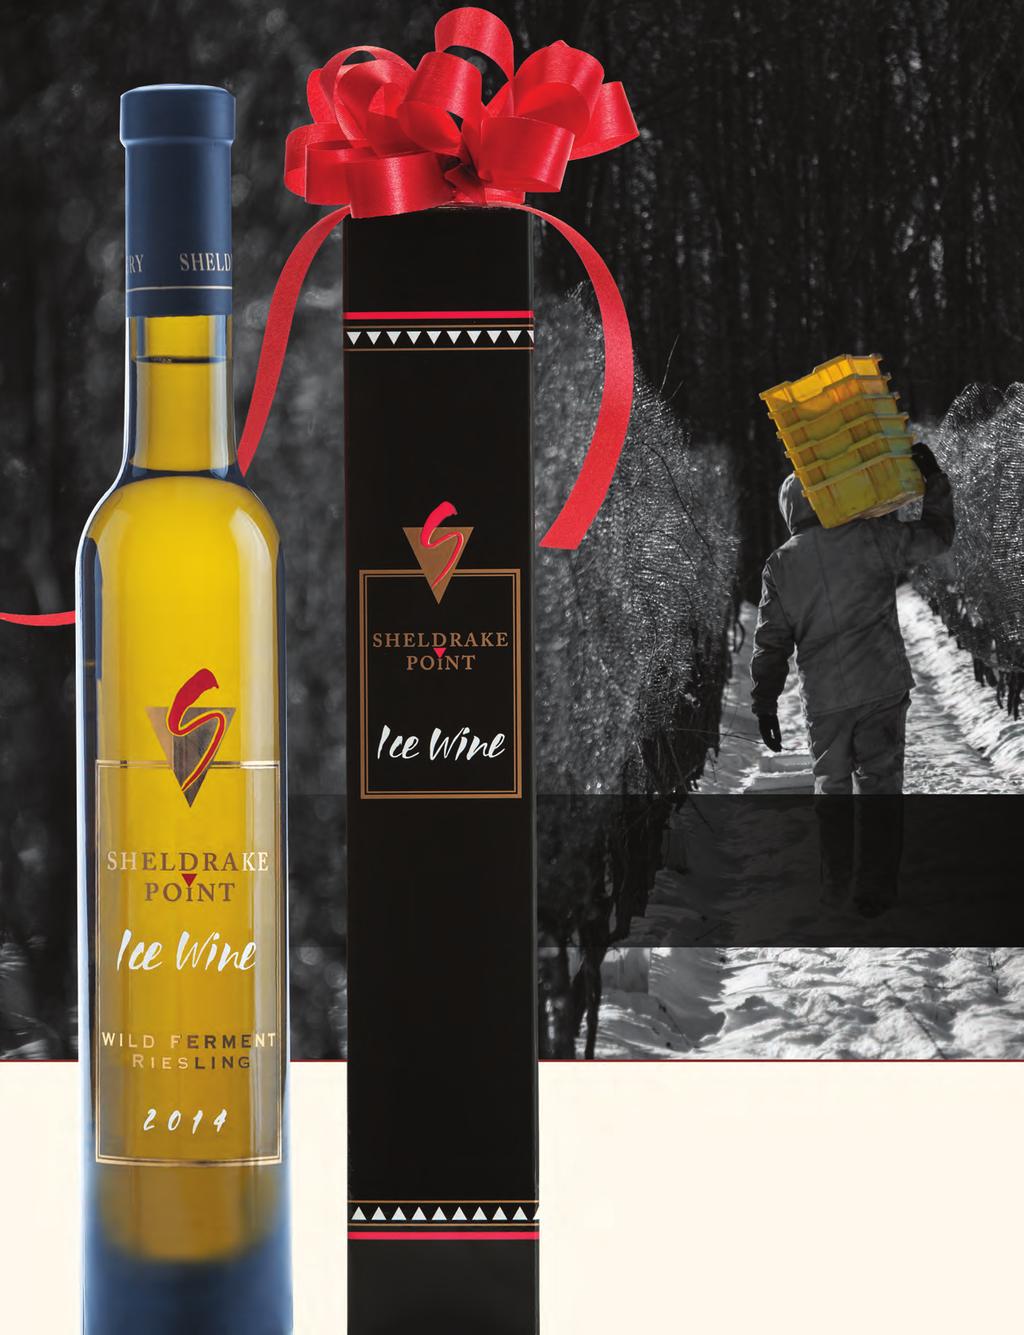 Go WILD with the Best American Riesling Design: In House Graphic Design Photography: Jan Regan Photography 2014 Wild Ferment Riesling Ice Wine 98 Points 2015 Canberra International Riesling